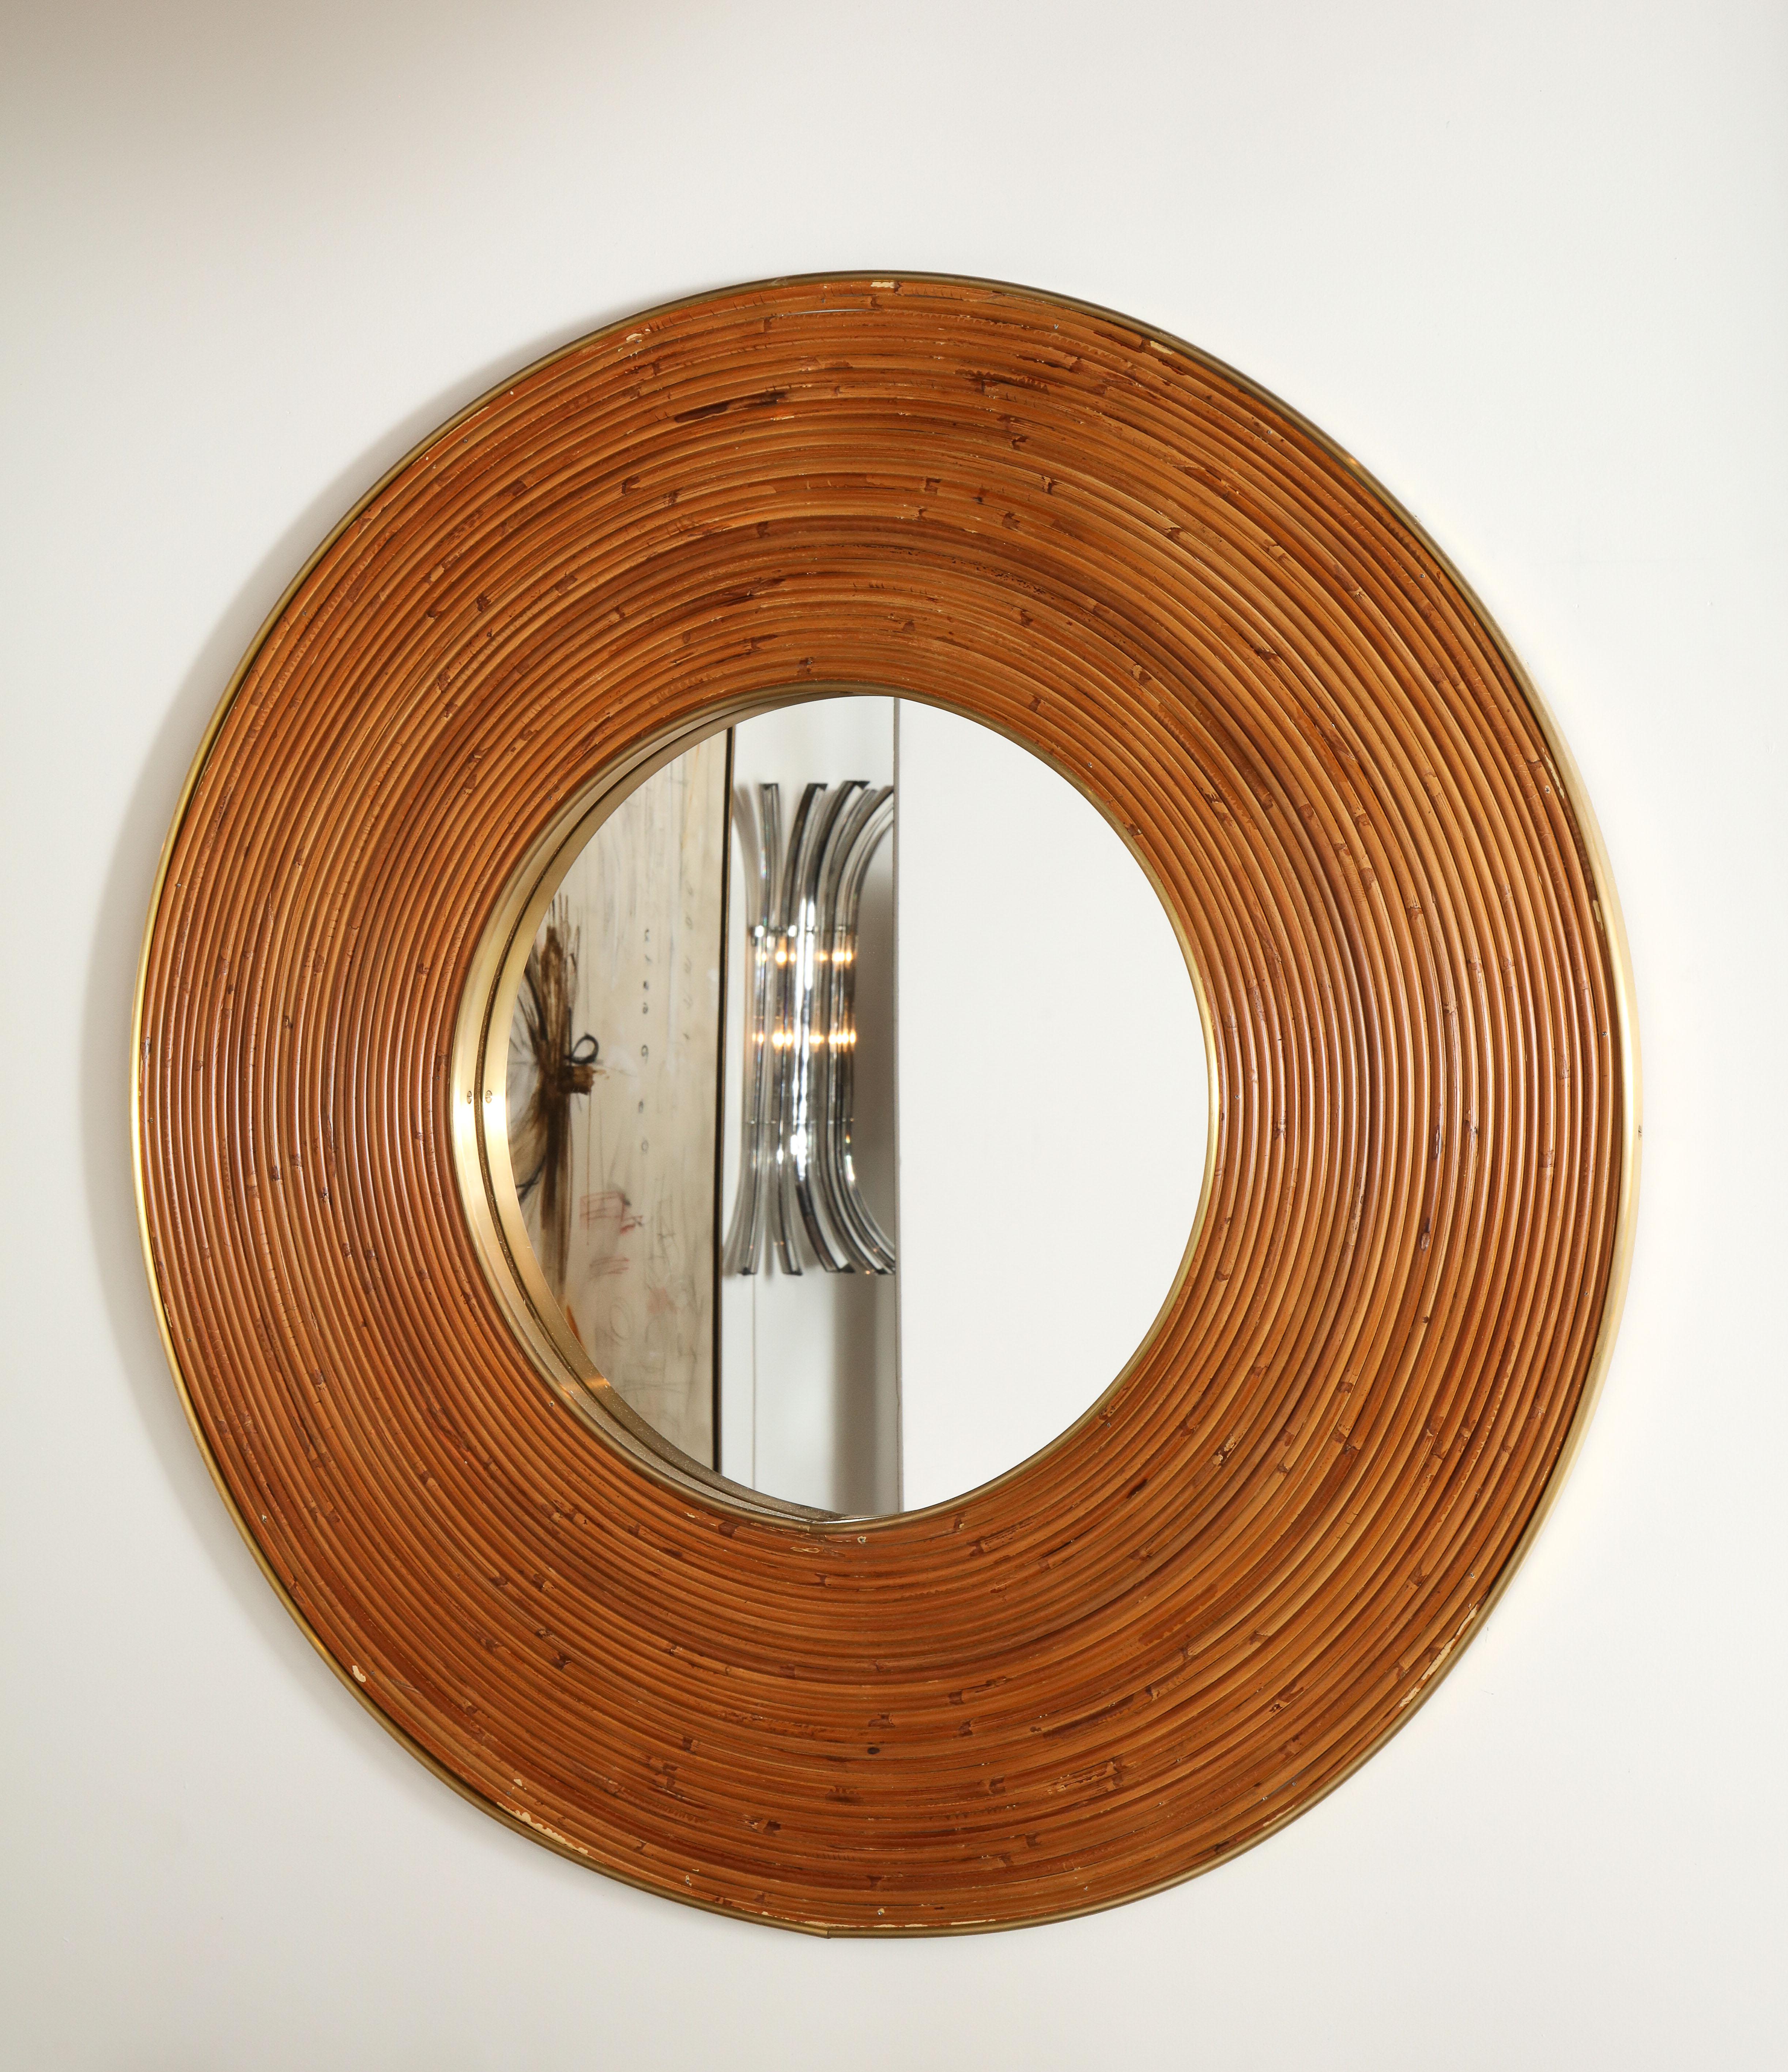 Large round mirror consisting of weaved natural reed and polished brass around the interior and exterior outermost perimeter. Excellent condition. Italy, circa 1970s. In perfect vintage condition. There is no damage to the reed. Polished brass